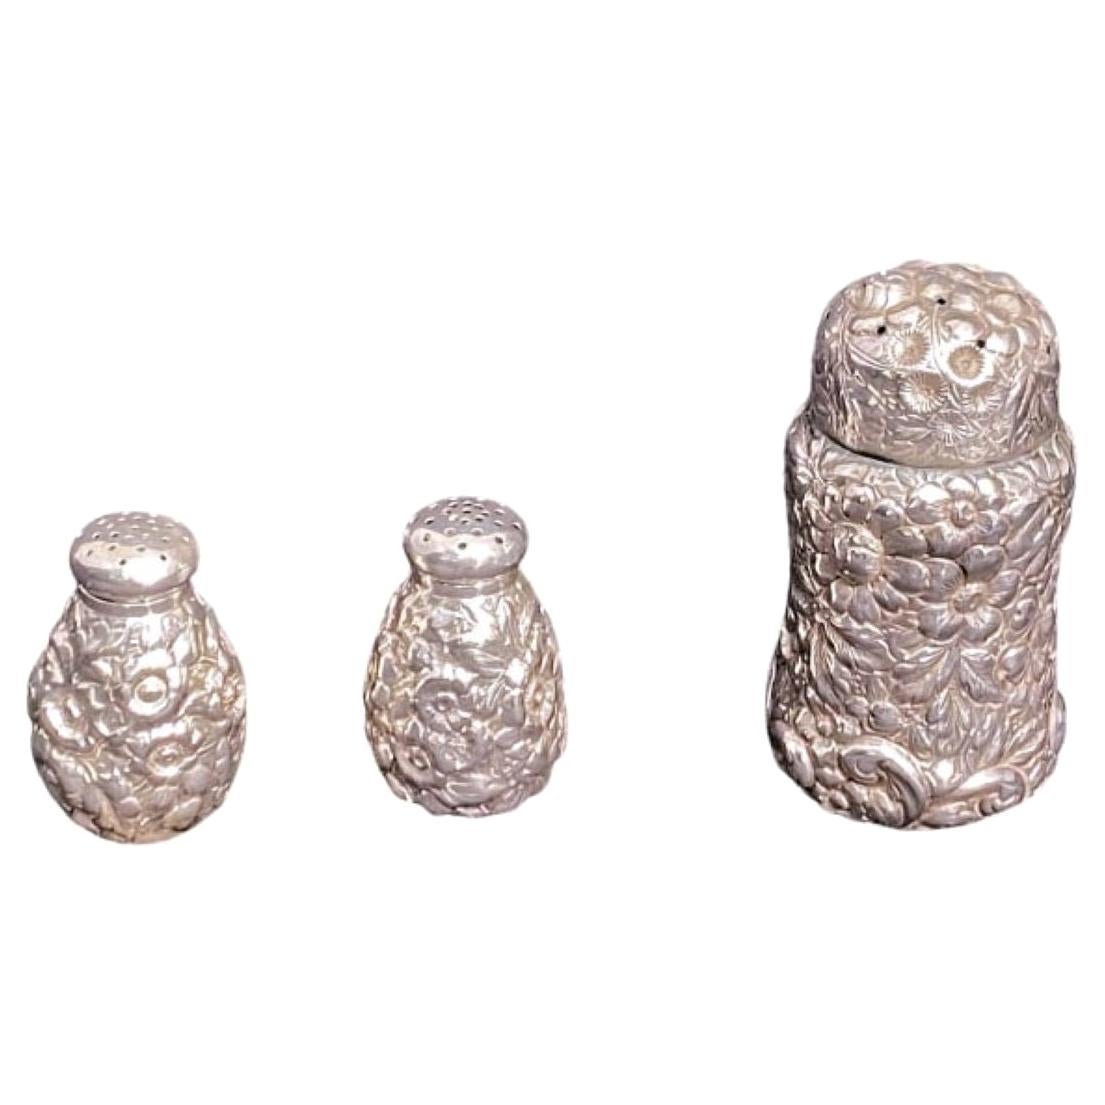 Shiebler Sterling Silver Repoussé Set of 3 Salt, Pepper, and Sugar Shakers from